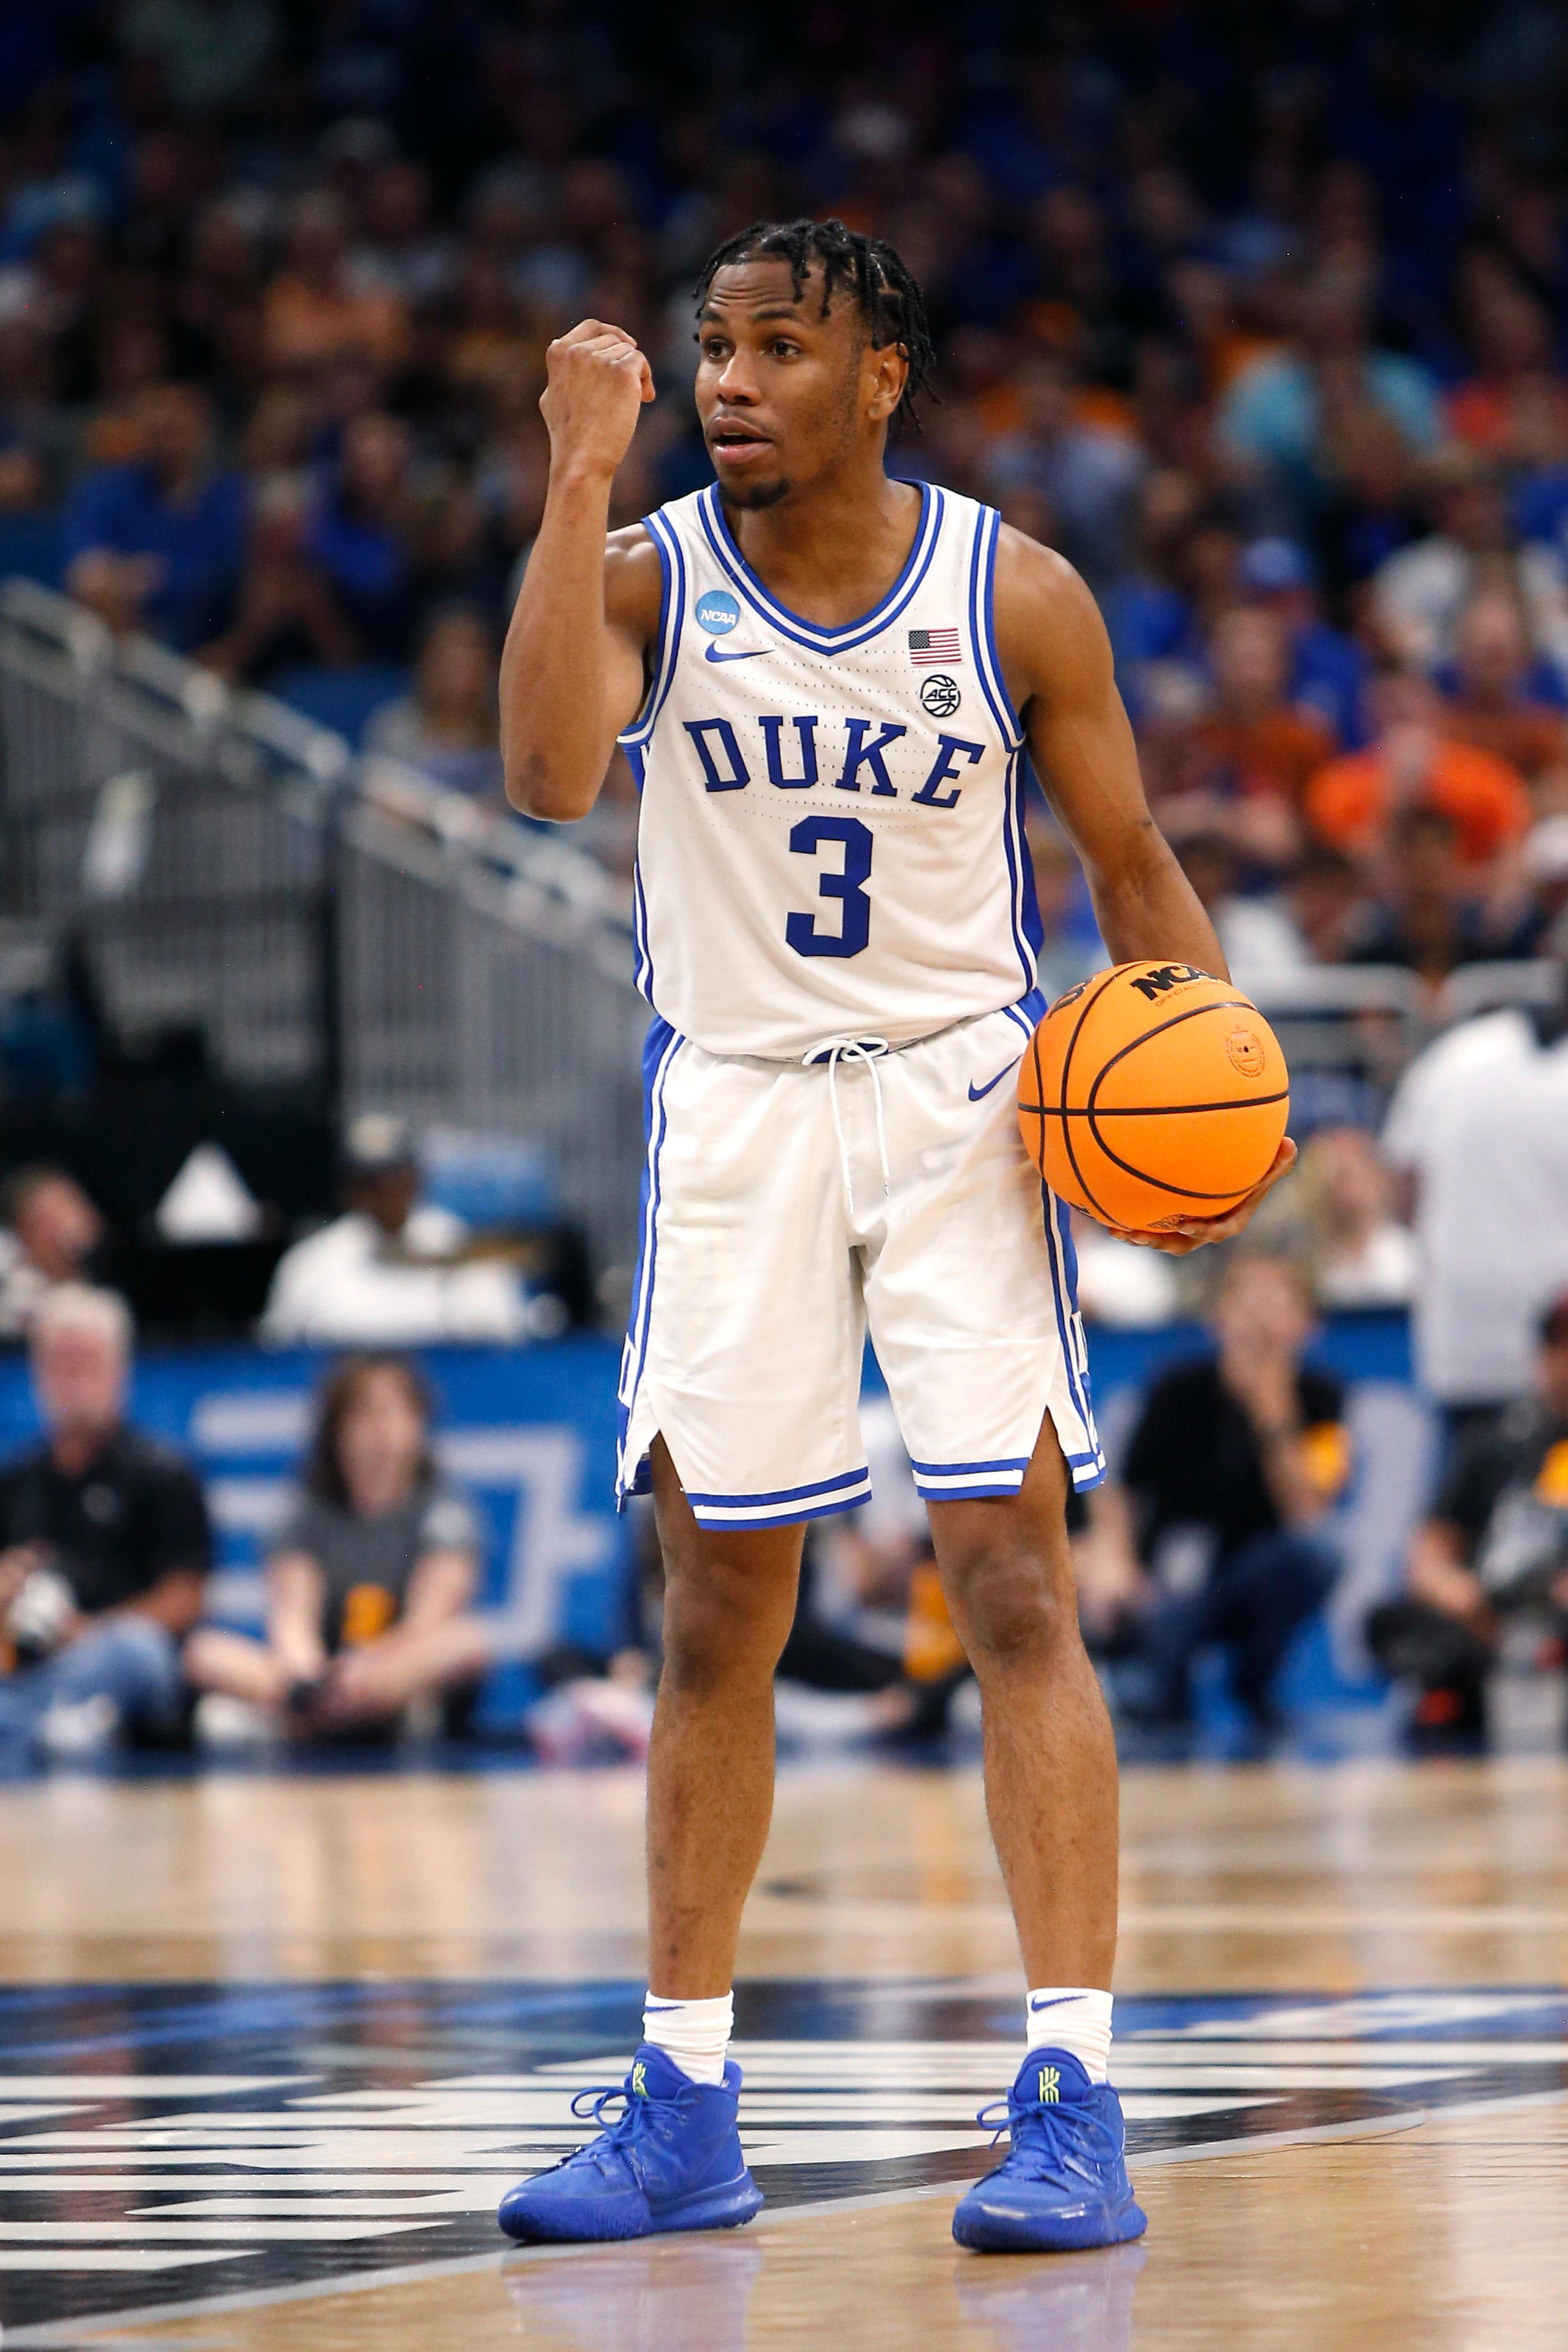 Duke basketball transfer tracker Who's staying, leaving and joining?